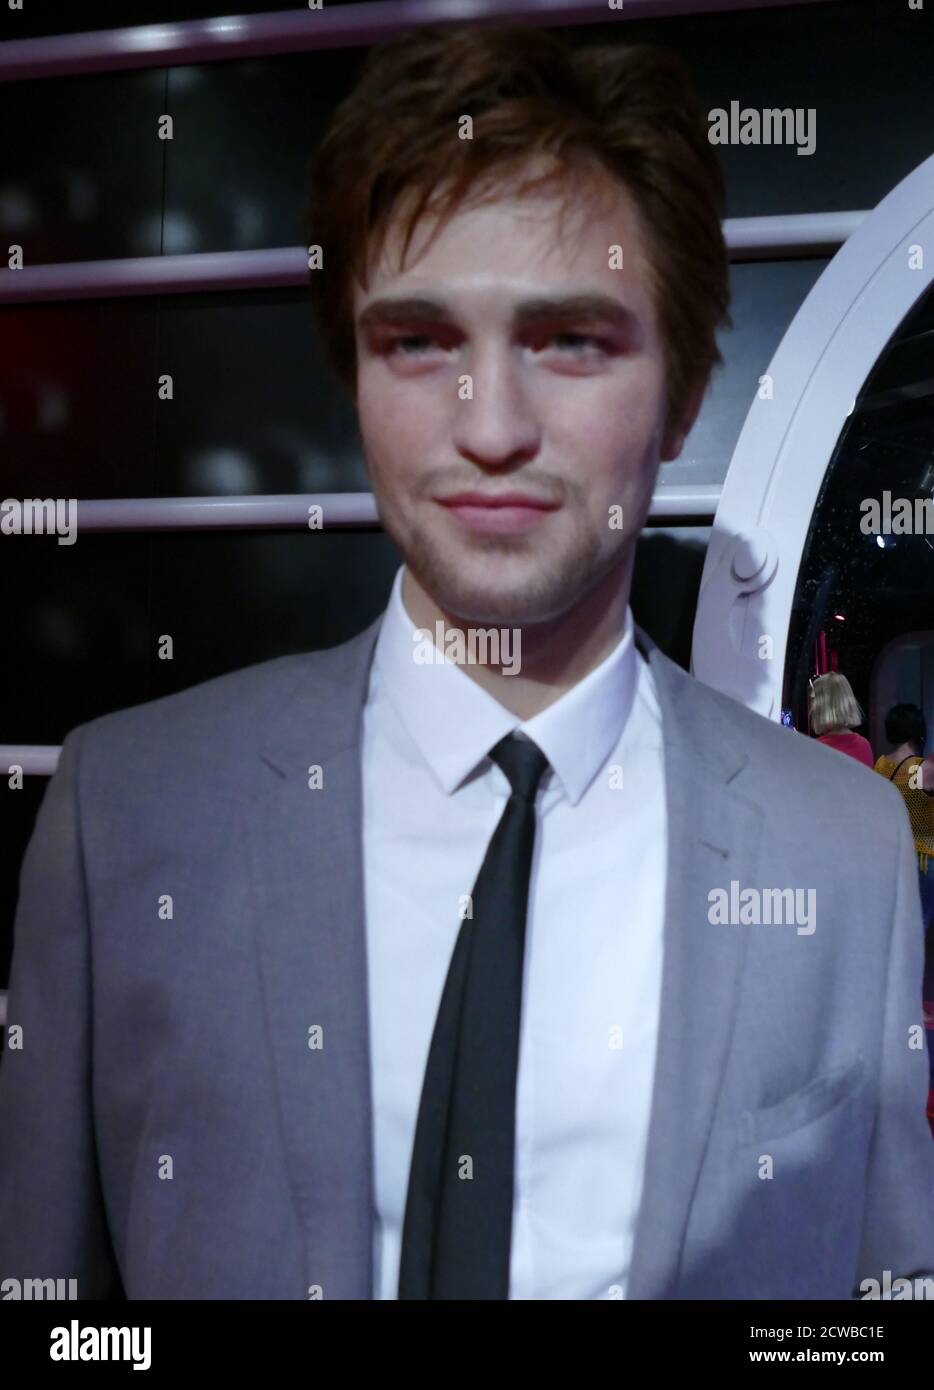 Waxwork Depicting Robert Pattinson Born 13 May 1986 English Actor After Starting To Act In A London Theatre Club At The Age Of 15 He Began His Film Career At Age 18